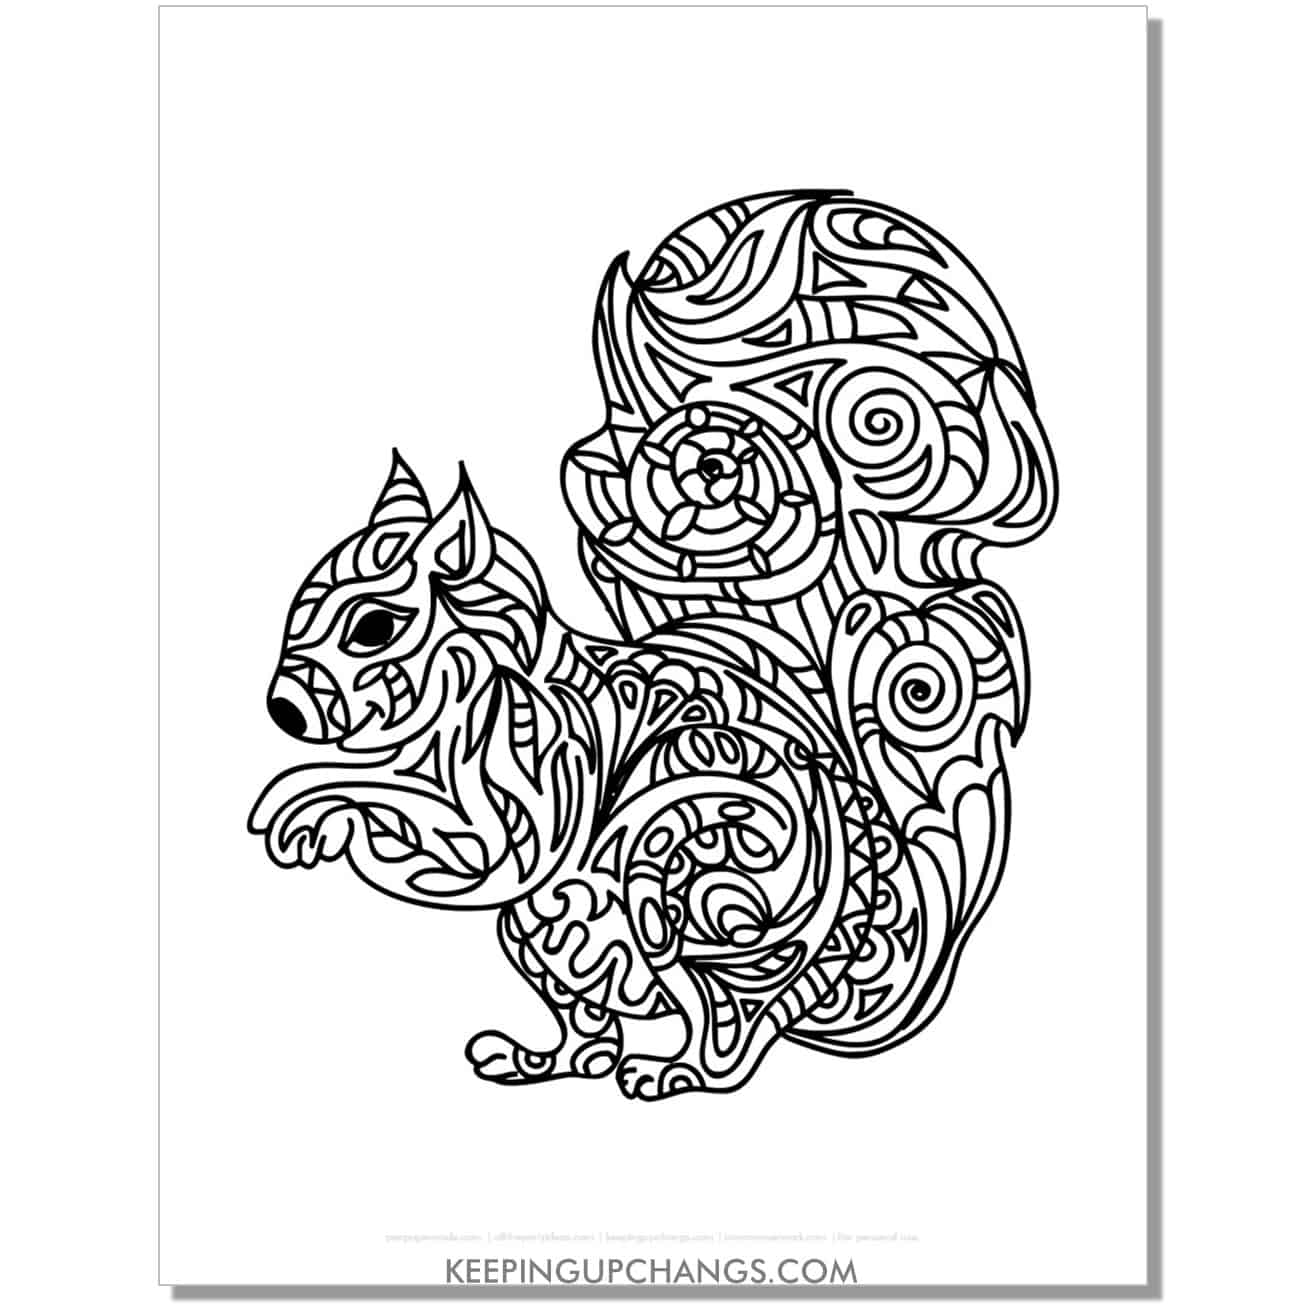 free squirrel mandala zentangle difficultcoloring page, sheet.